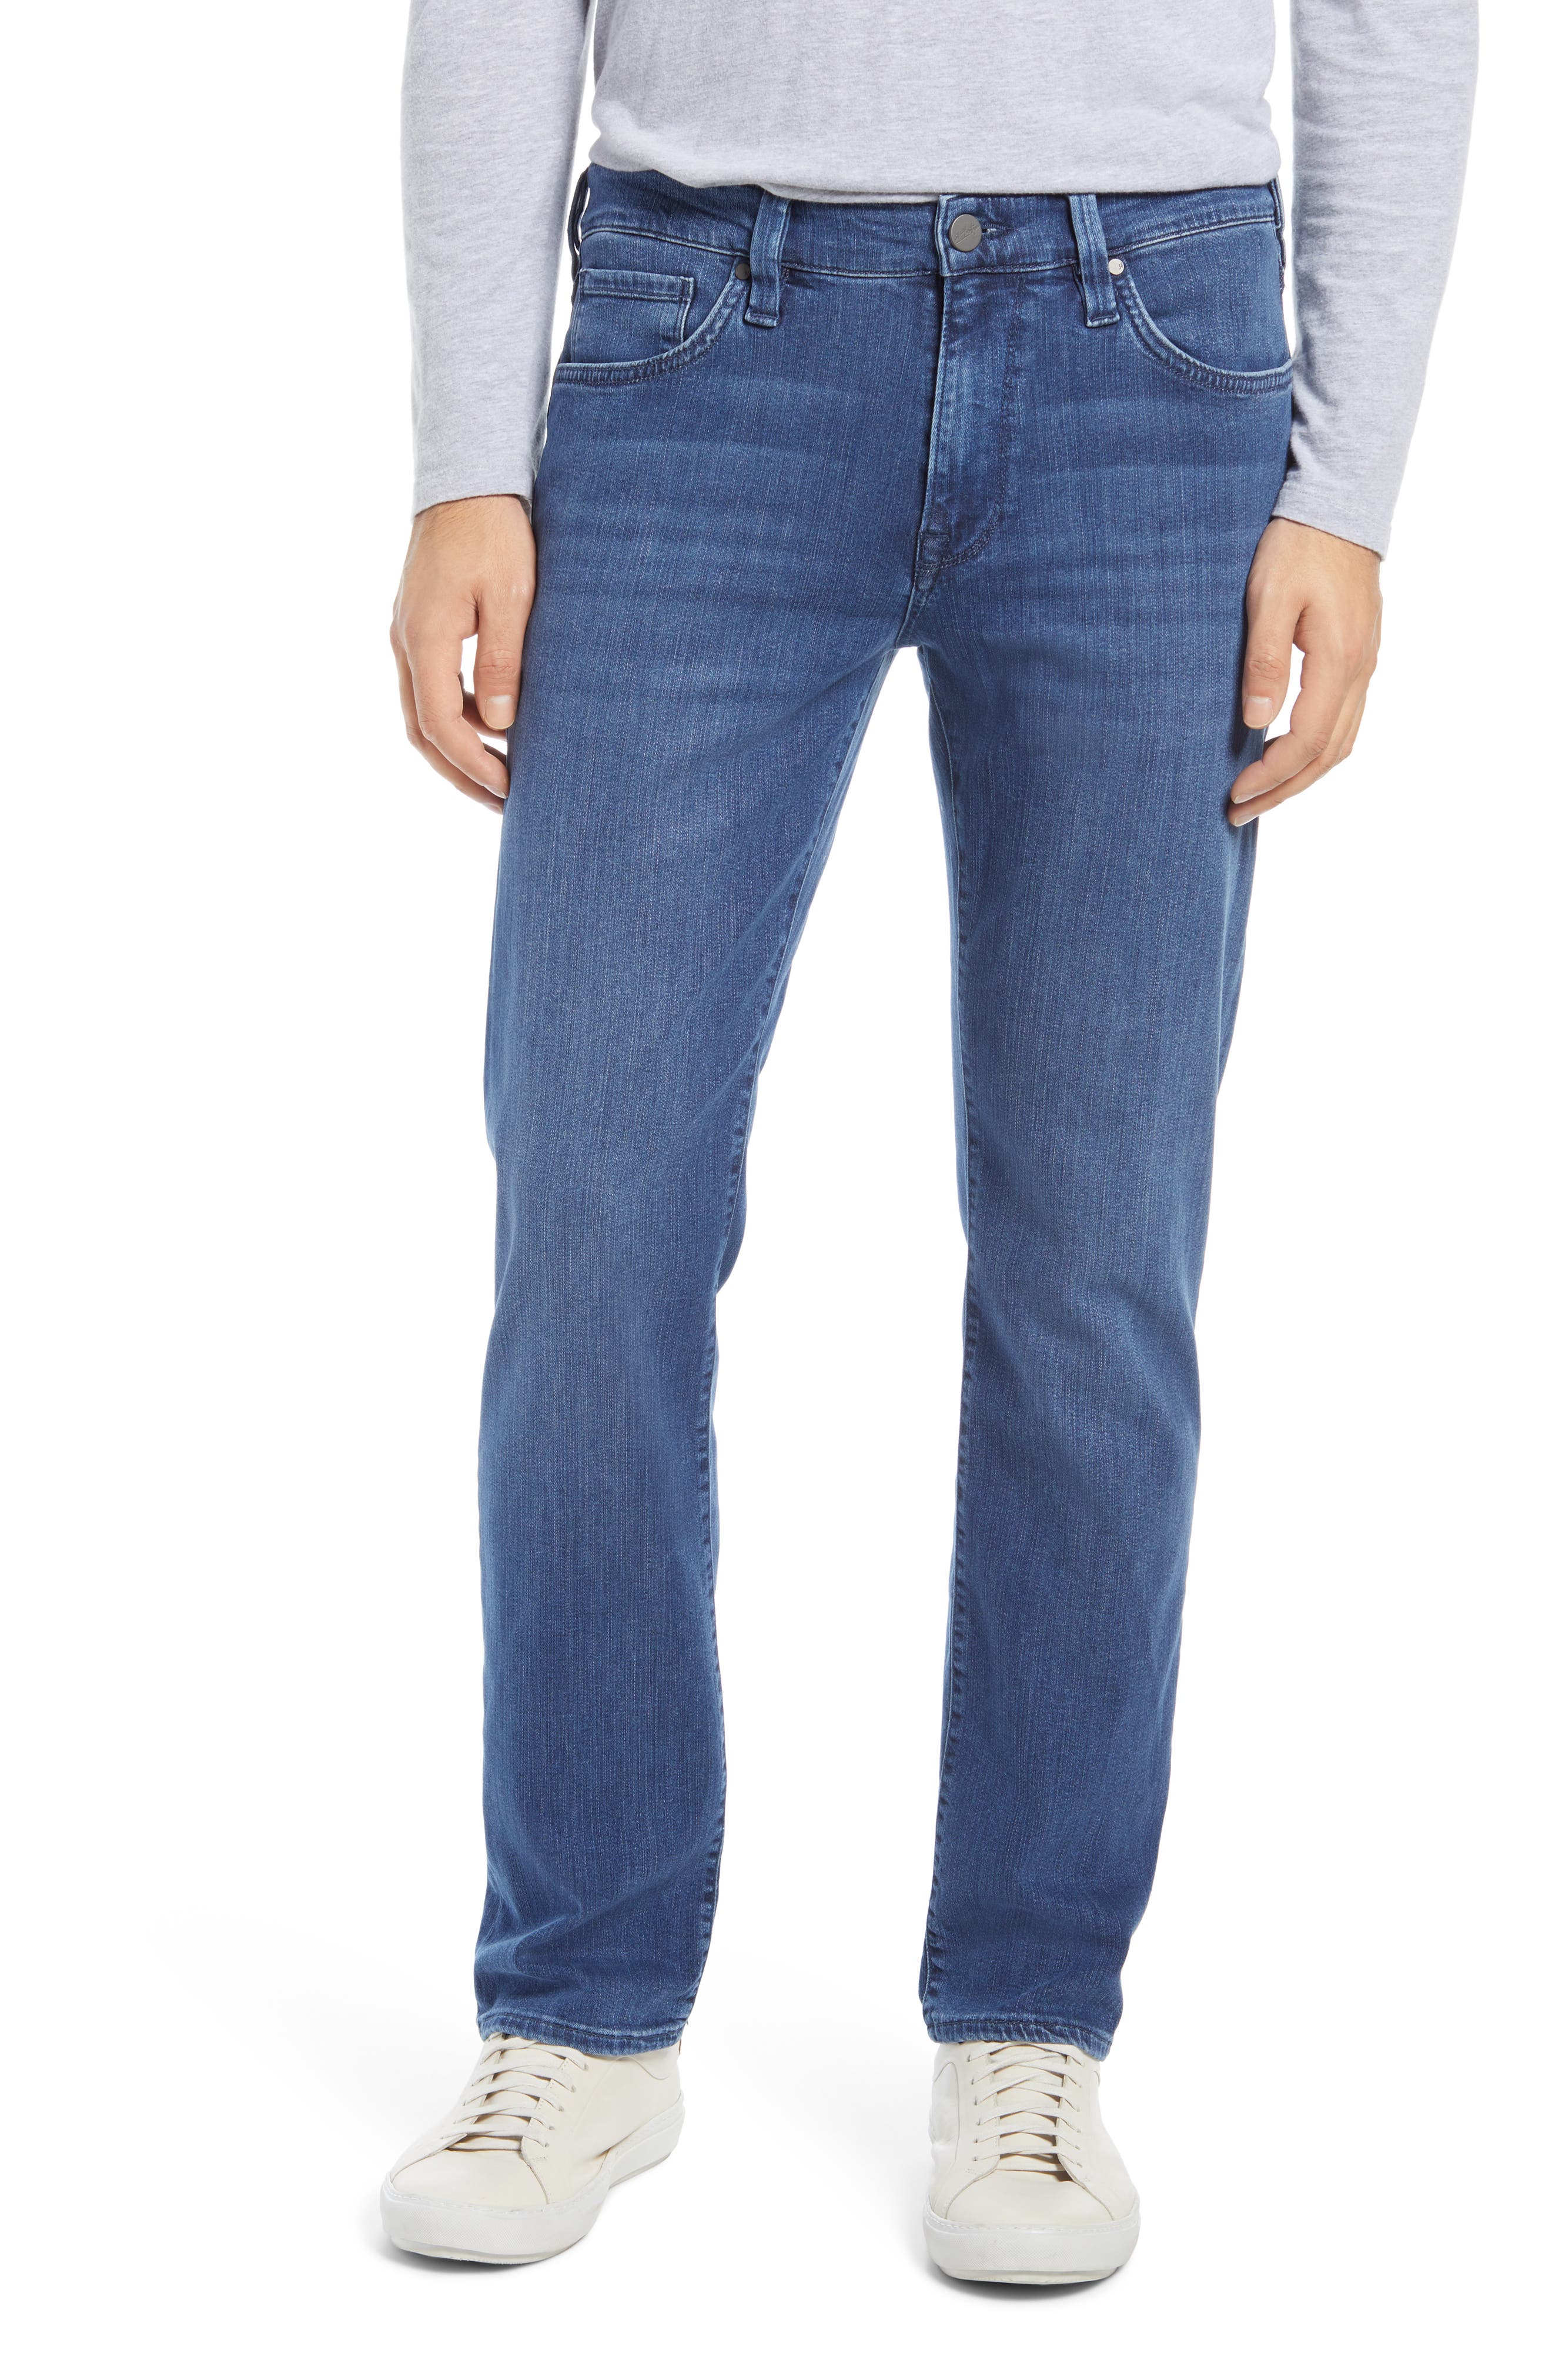 34 HERITAGE COURAGE STRAIGHT LEG JEANS,889410608576